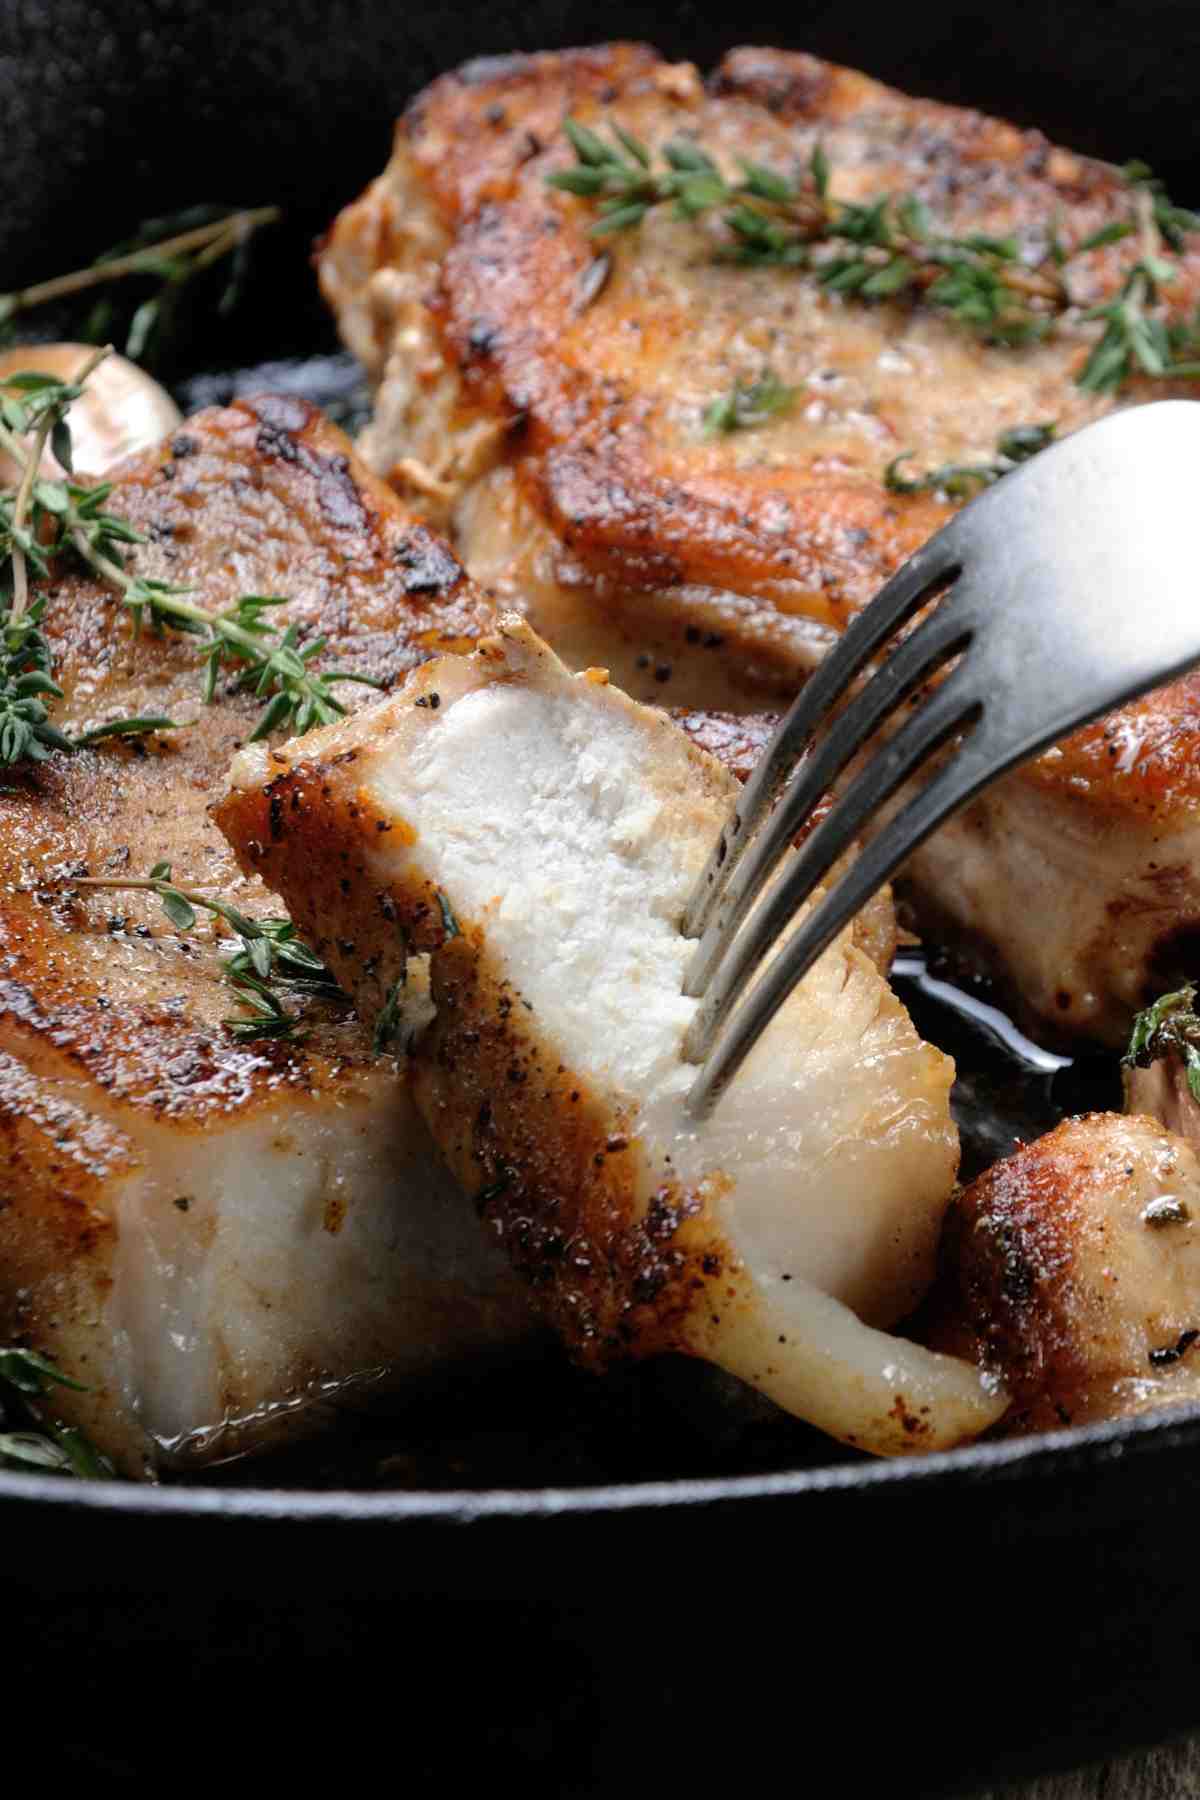 What’s the best temp to cook pork chops? Properly cooked pork chops are tender, juicy, and full of flavors, while overcooked pork is chewy and dry. From cooking temperature to internal temperature, we got you covered.